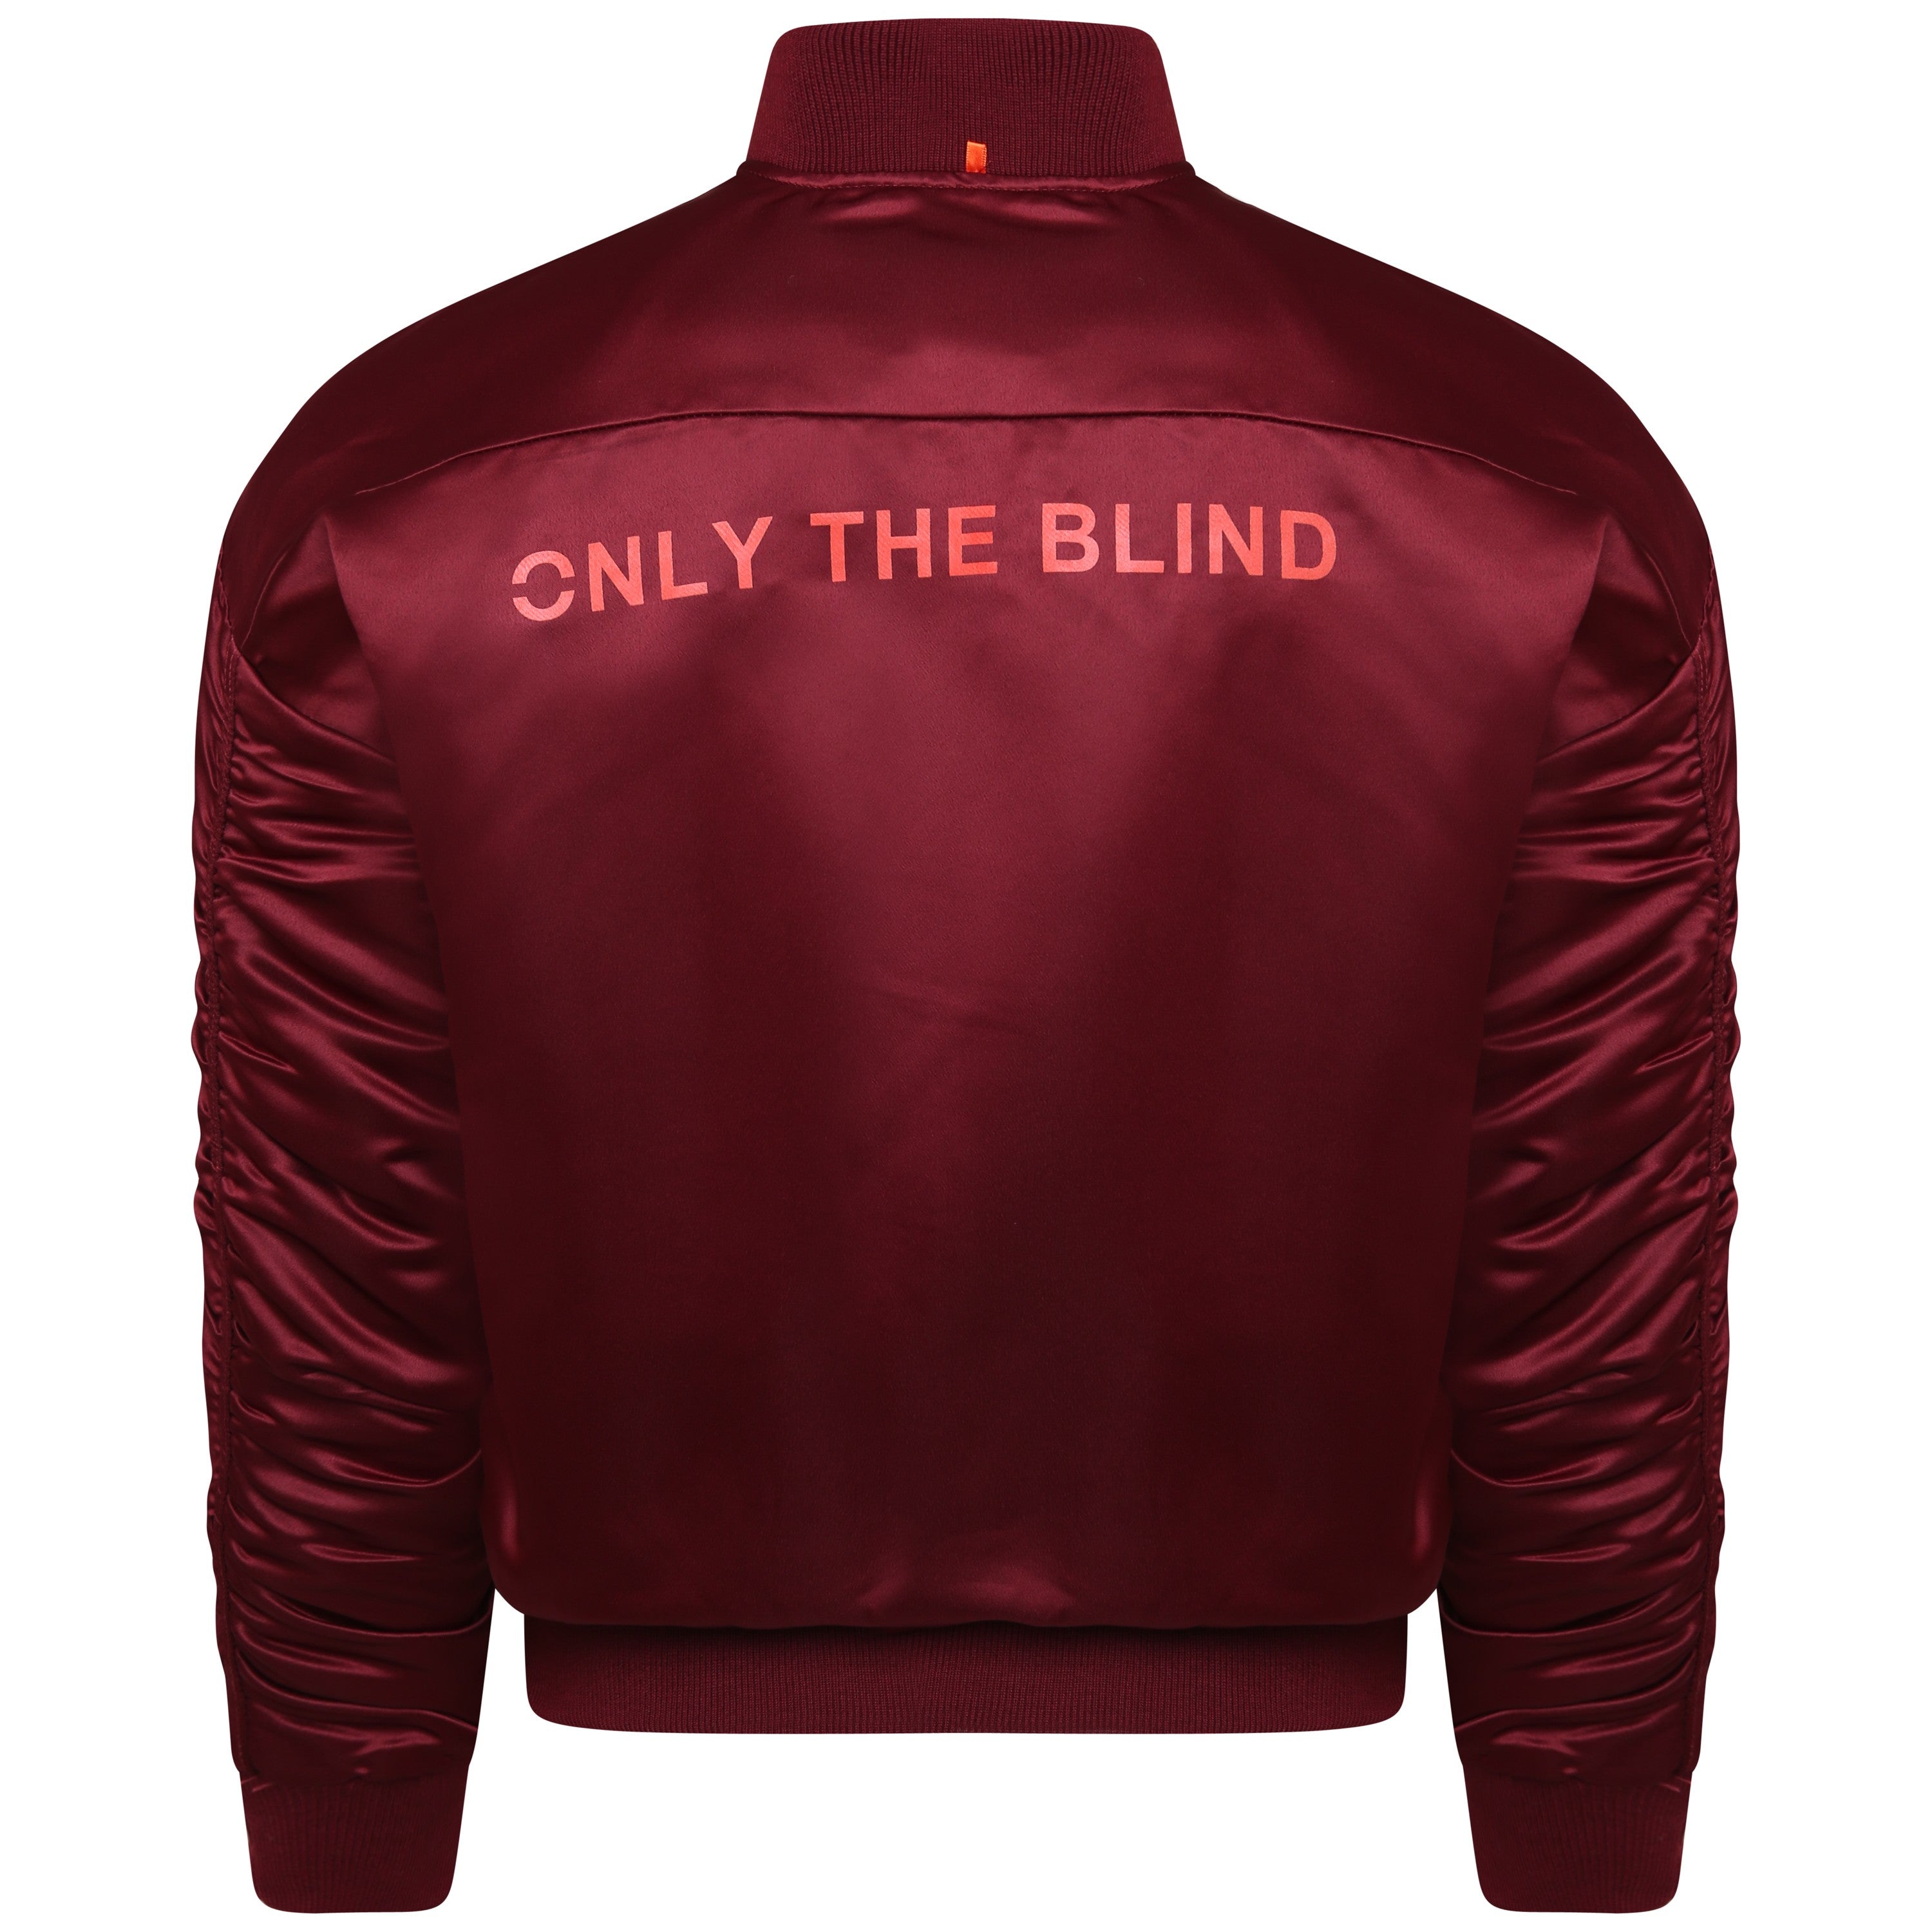 ONLY THE BLIND - Signature satin wine bomber jacket – ONLY THE BLIND™